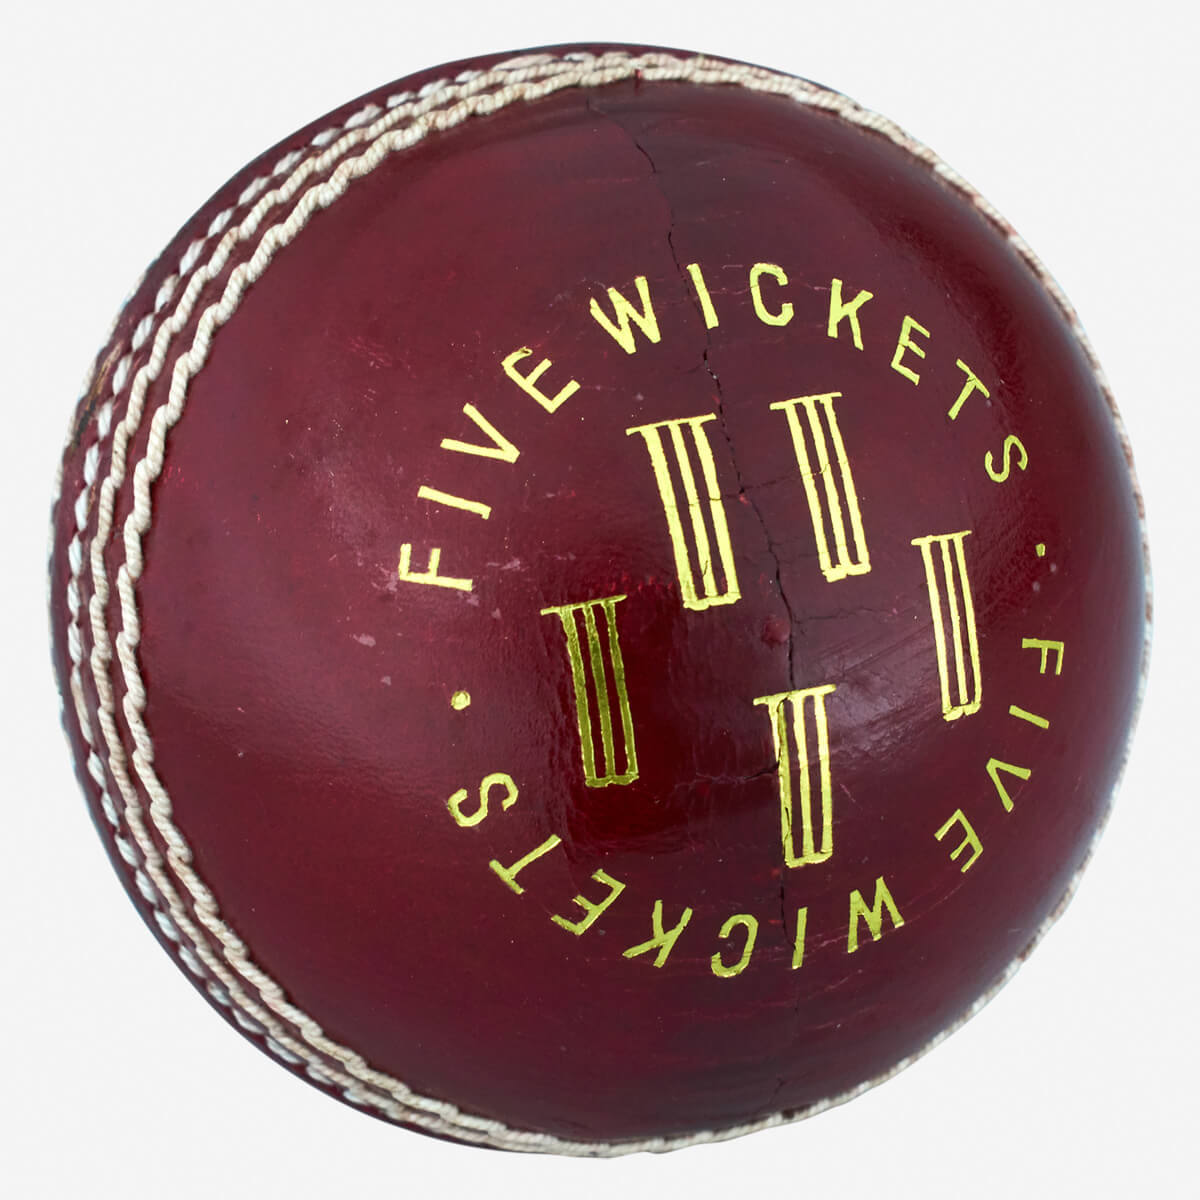 1A2696M01 Readers Five wickets presentation cricket ball